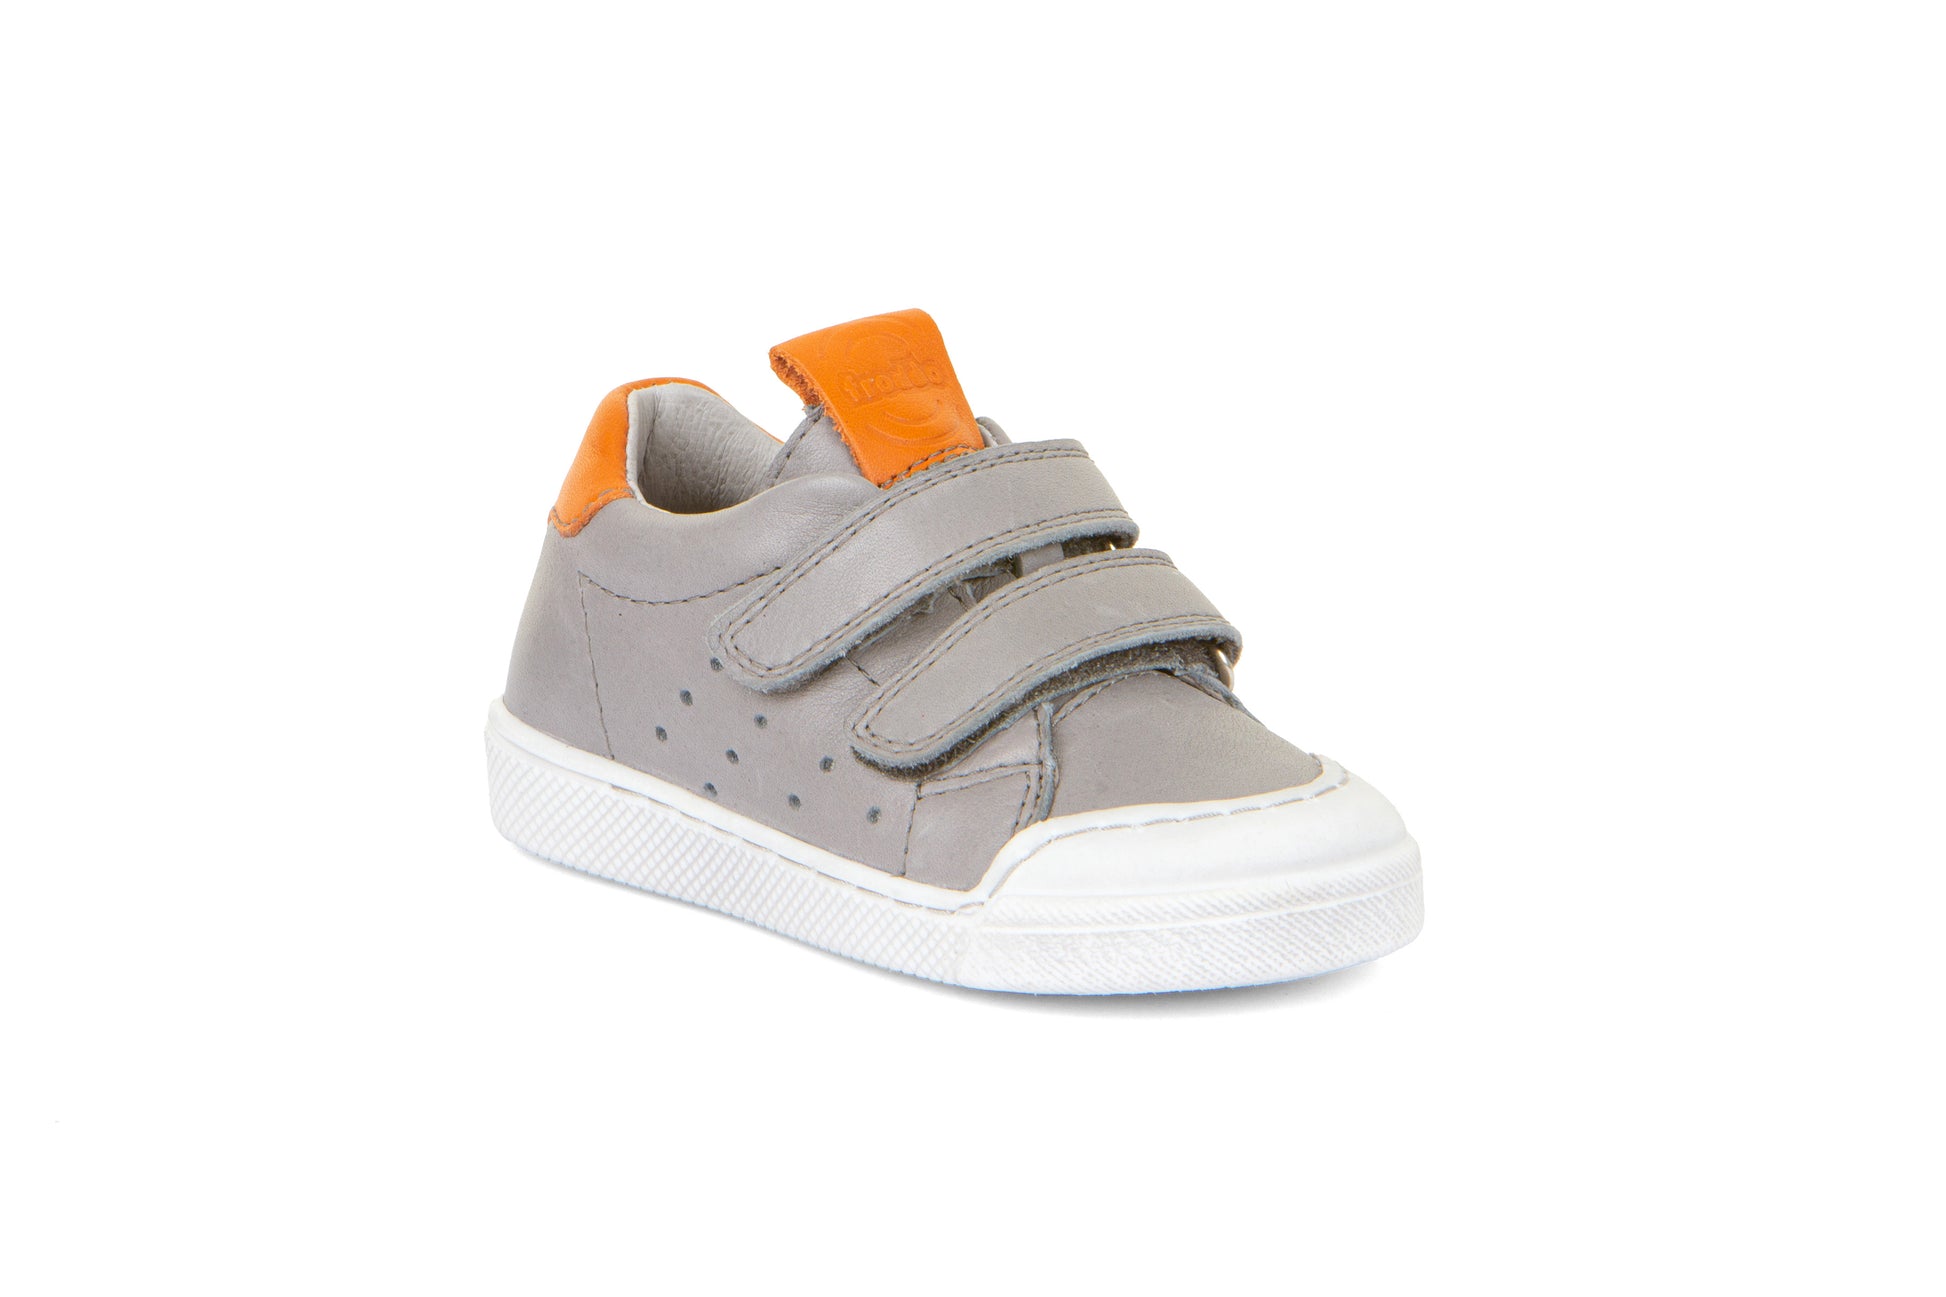 A boys casual shoe by Froddo, style Rosario G2130316-15, in grey leather with orange trim and toe bumper. Velcro fastening. Angled view.